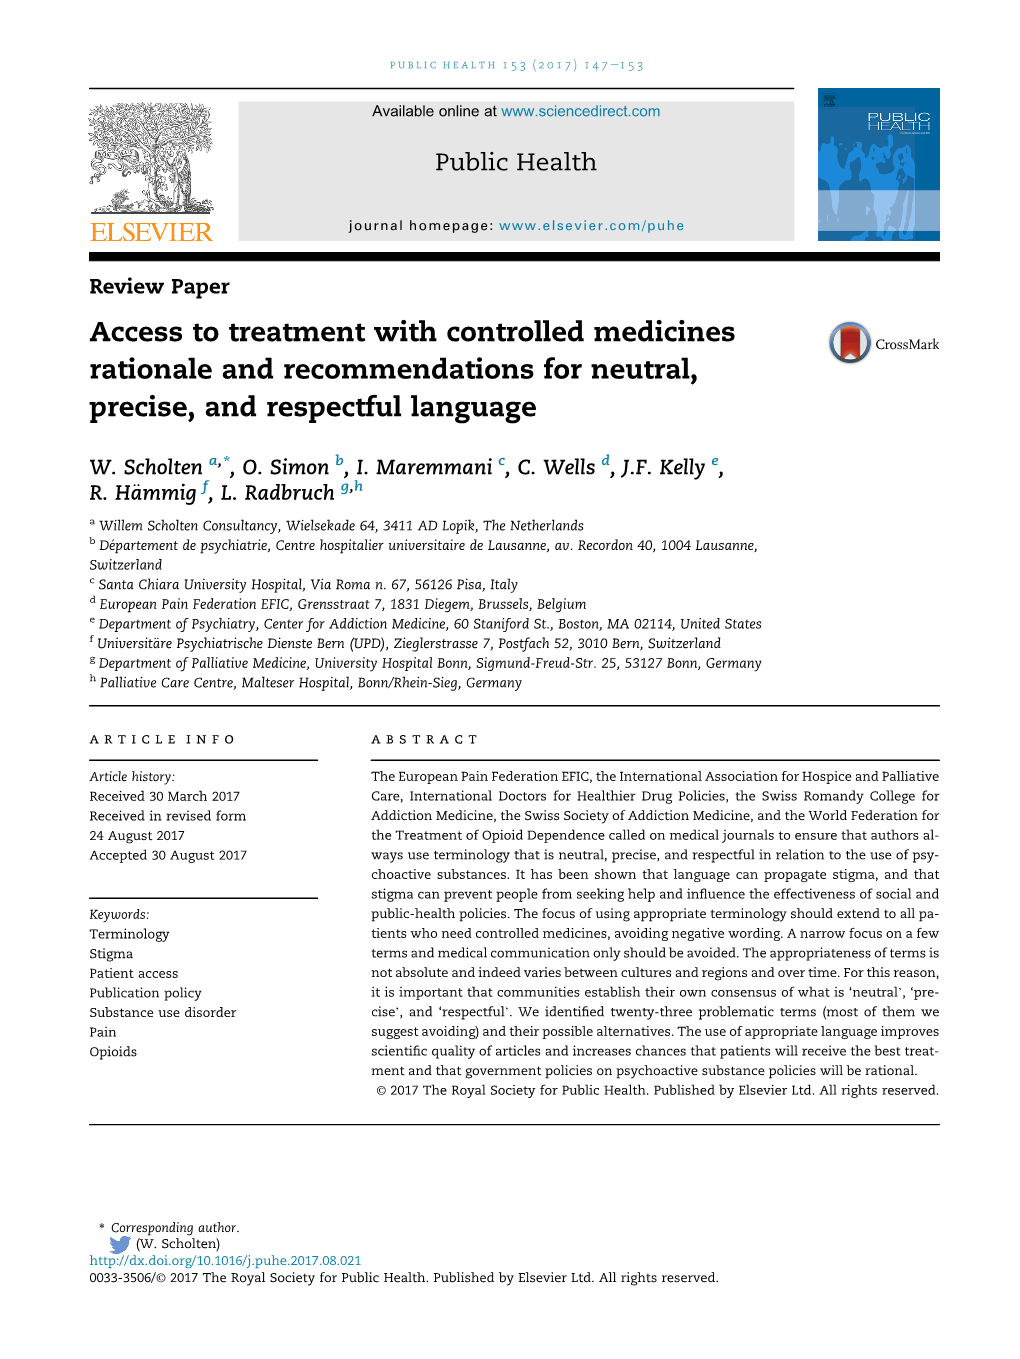 Access to Treatment with Controlled Medicines Rationale and Recommendations for Neutral, Precise, and Respectful Language